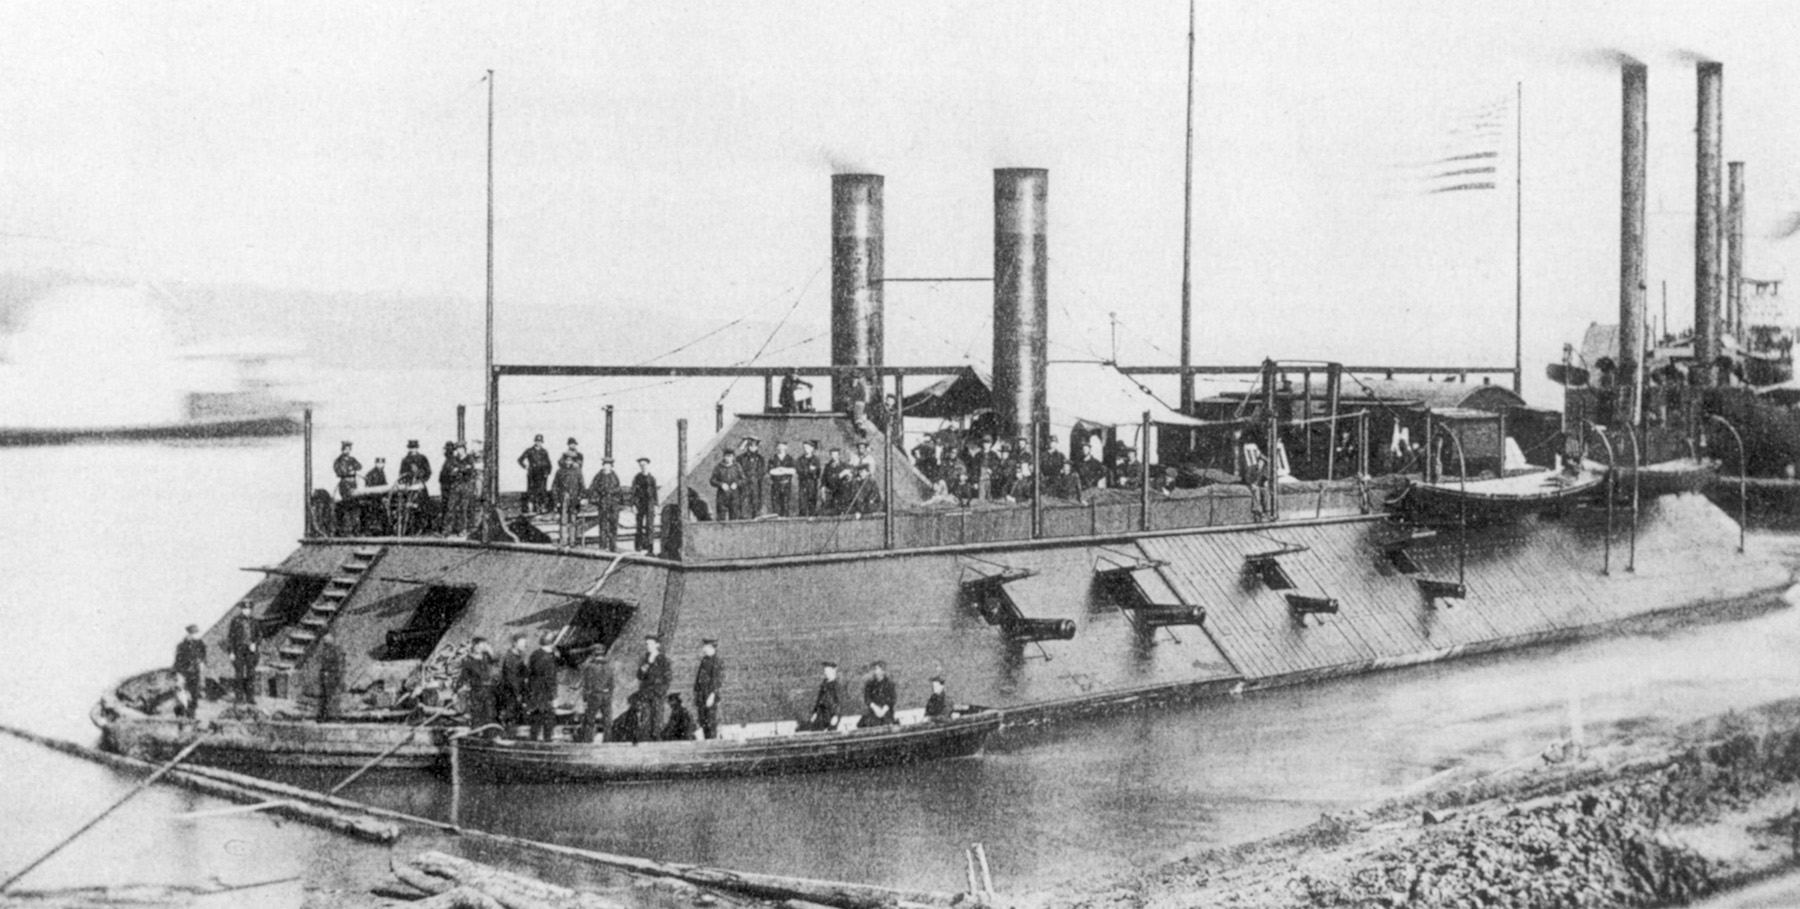 The Carondelet was one of James Eads’ hastily but soundly constructed gunboats. She bombarded both forts and eventually became the most celebrated boat in the West. 